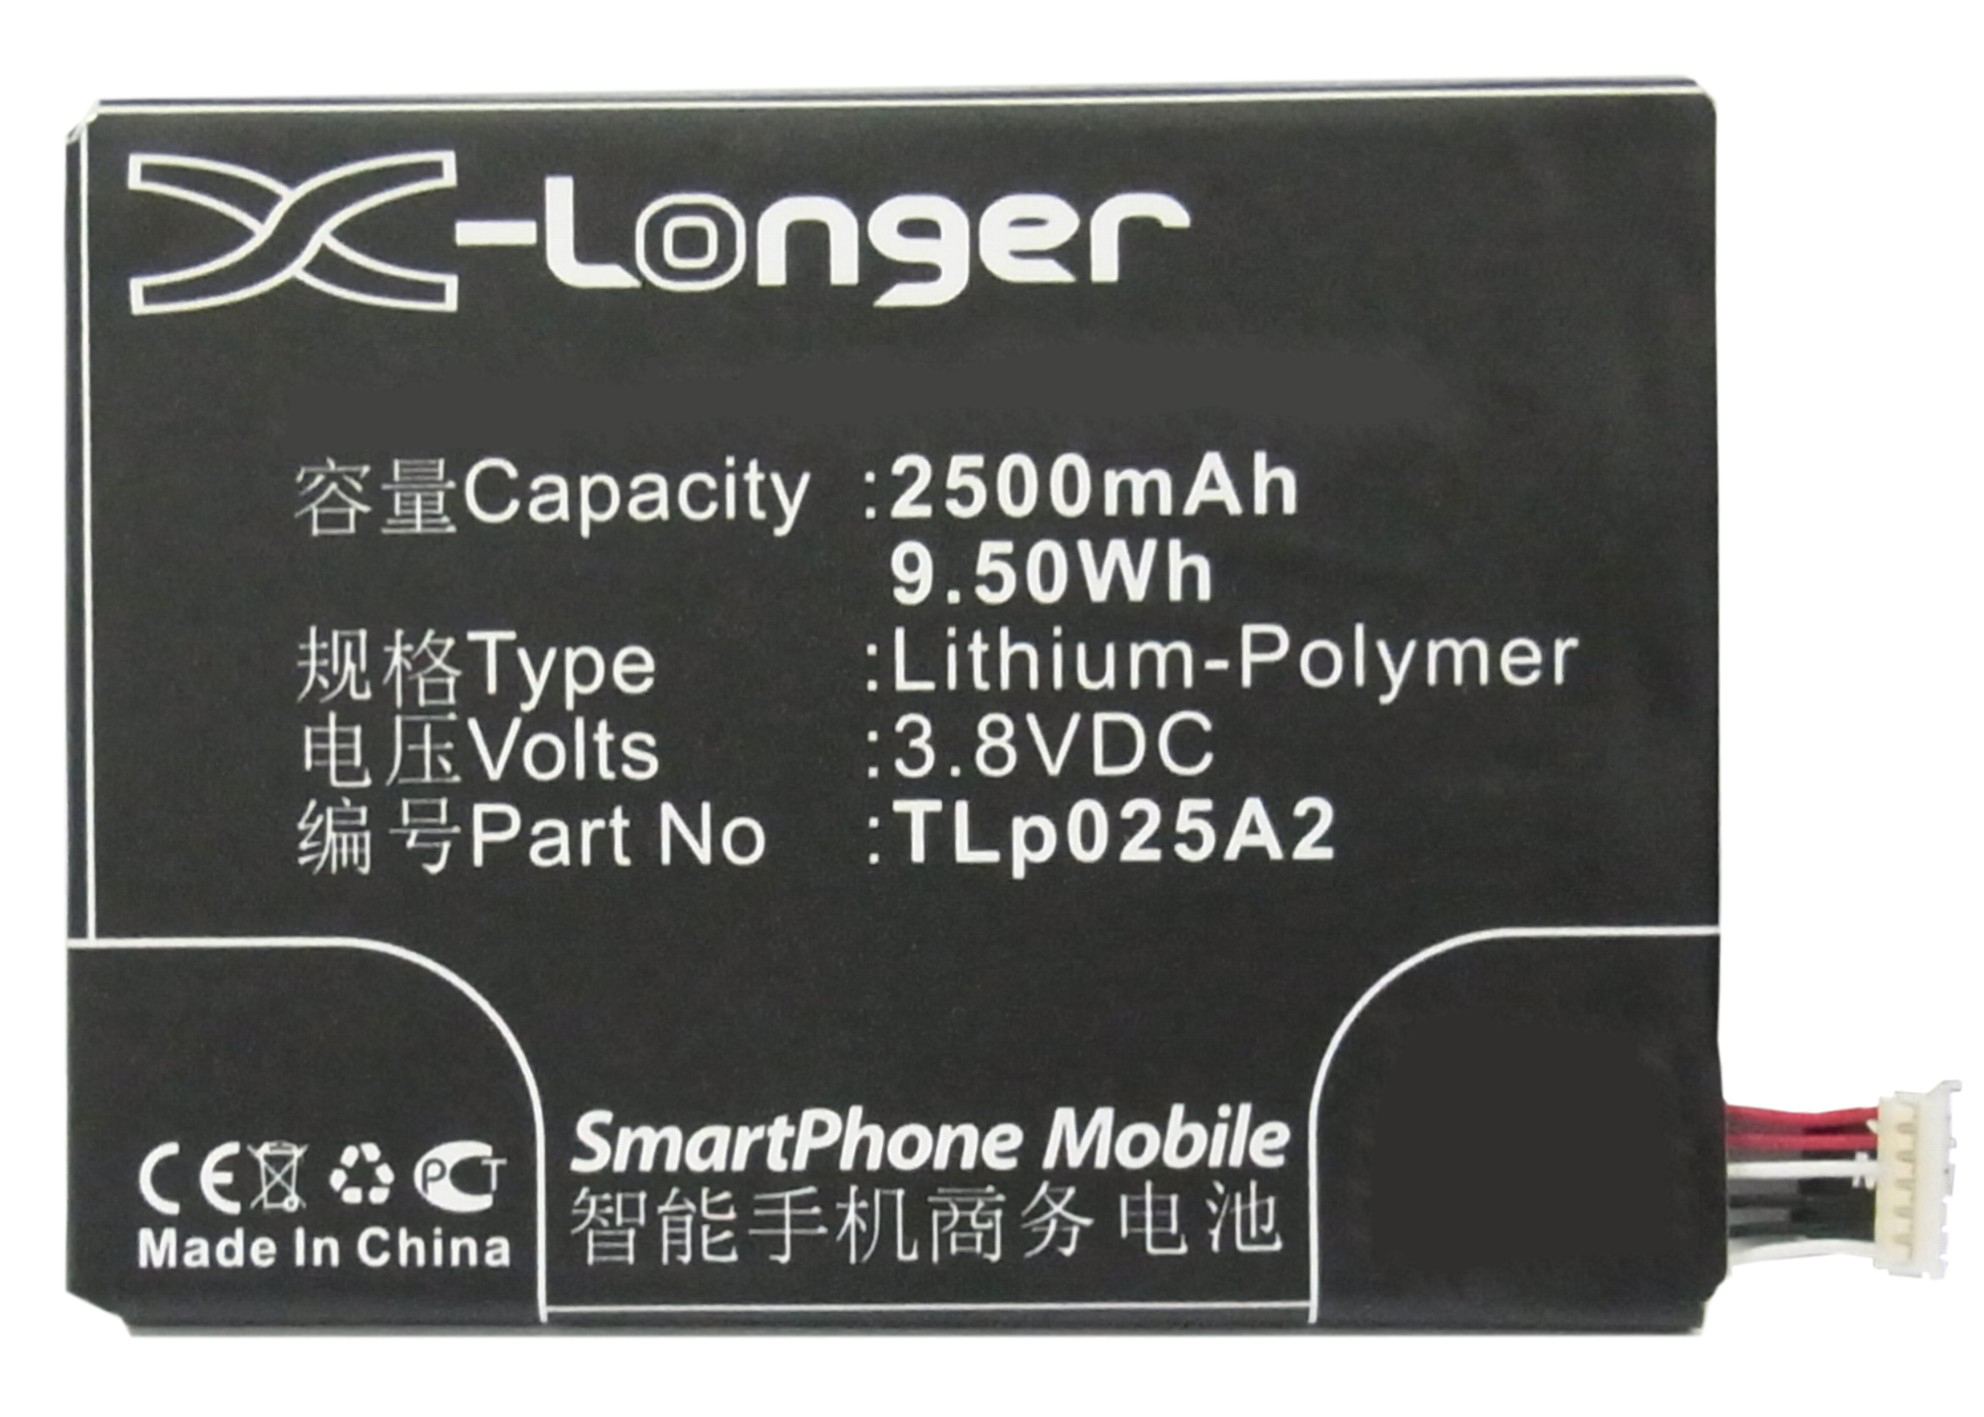 Batteries for PanasonicCell Phone